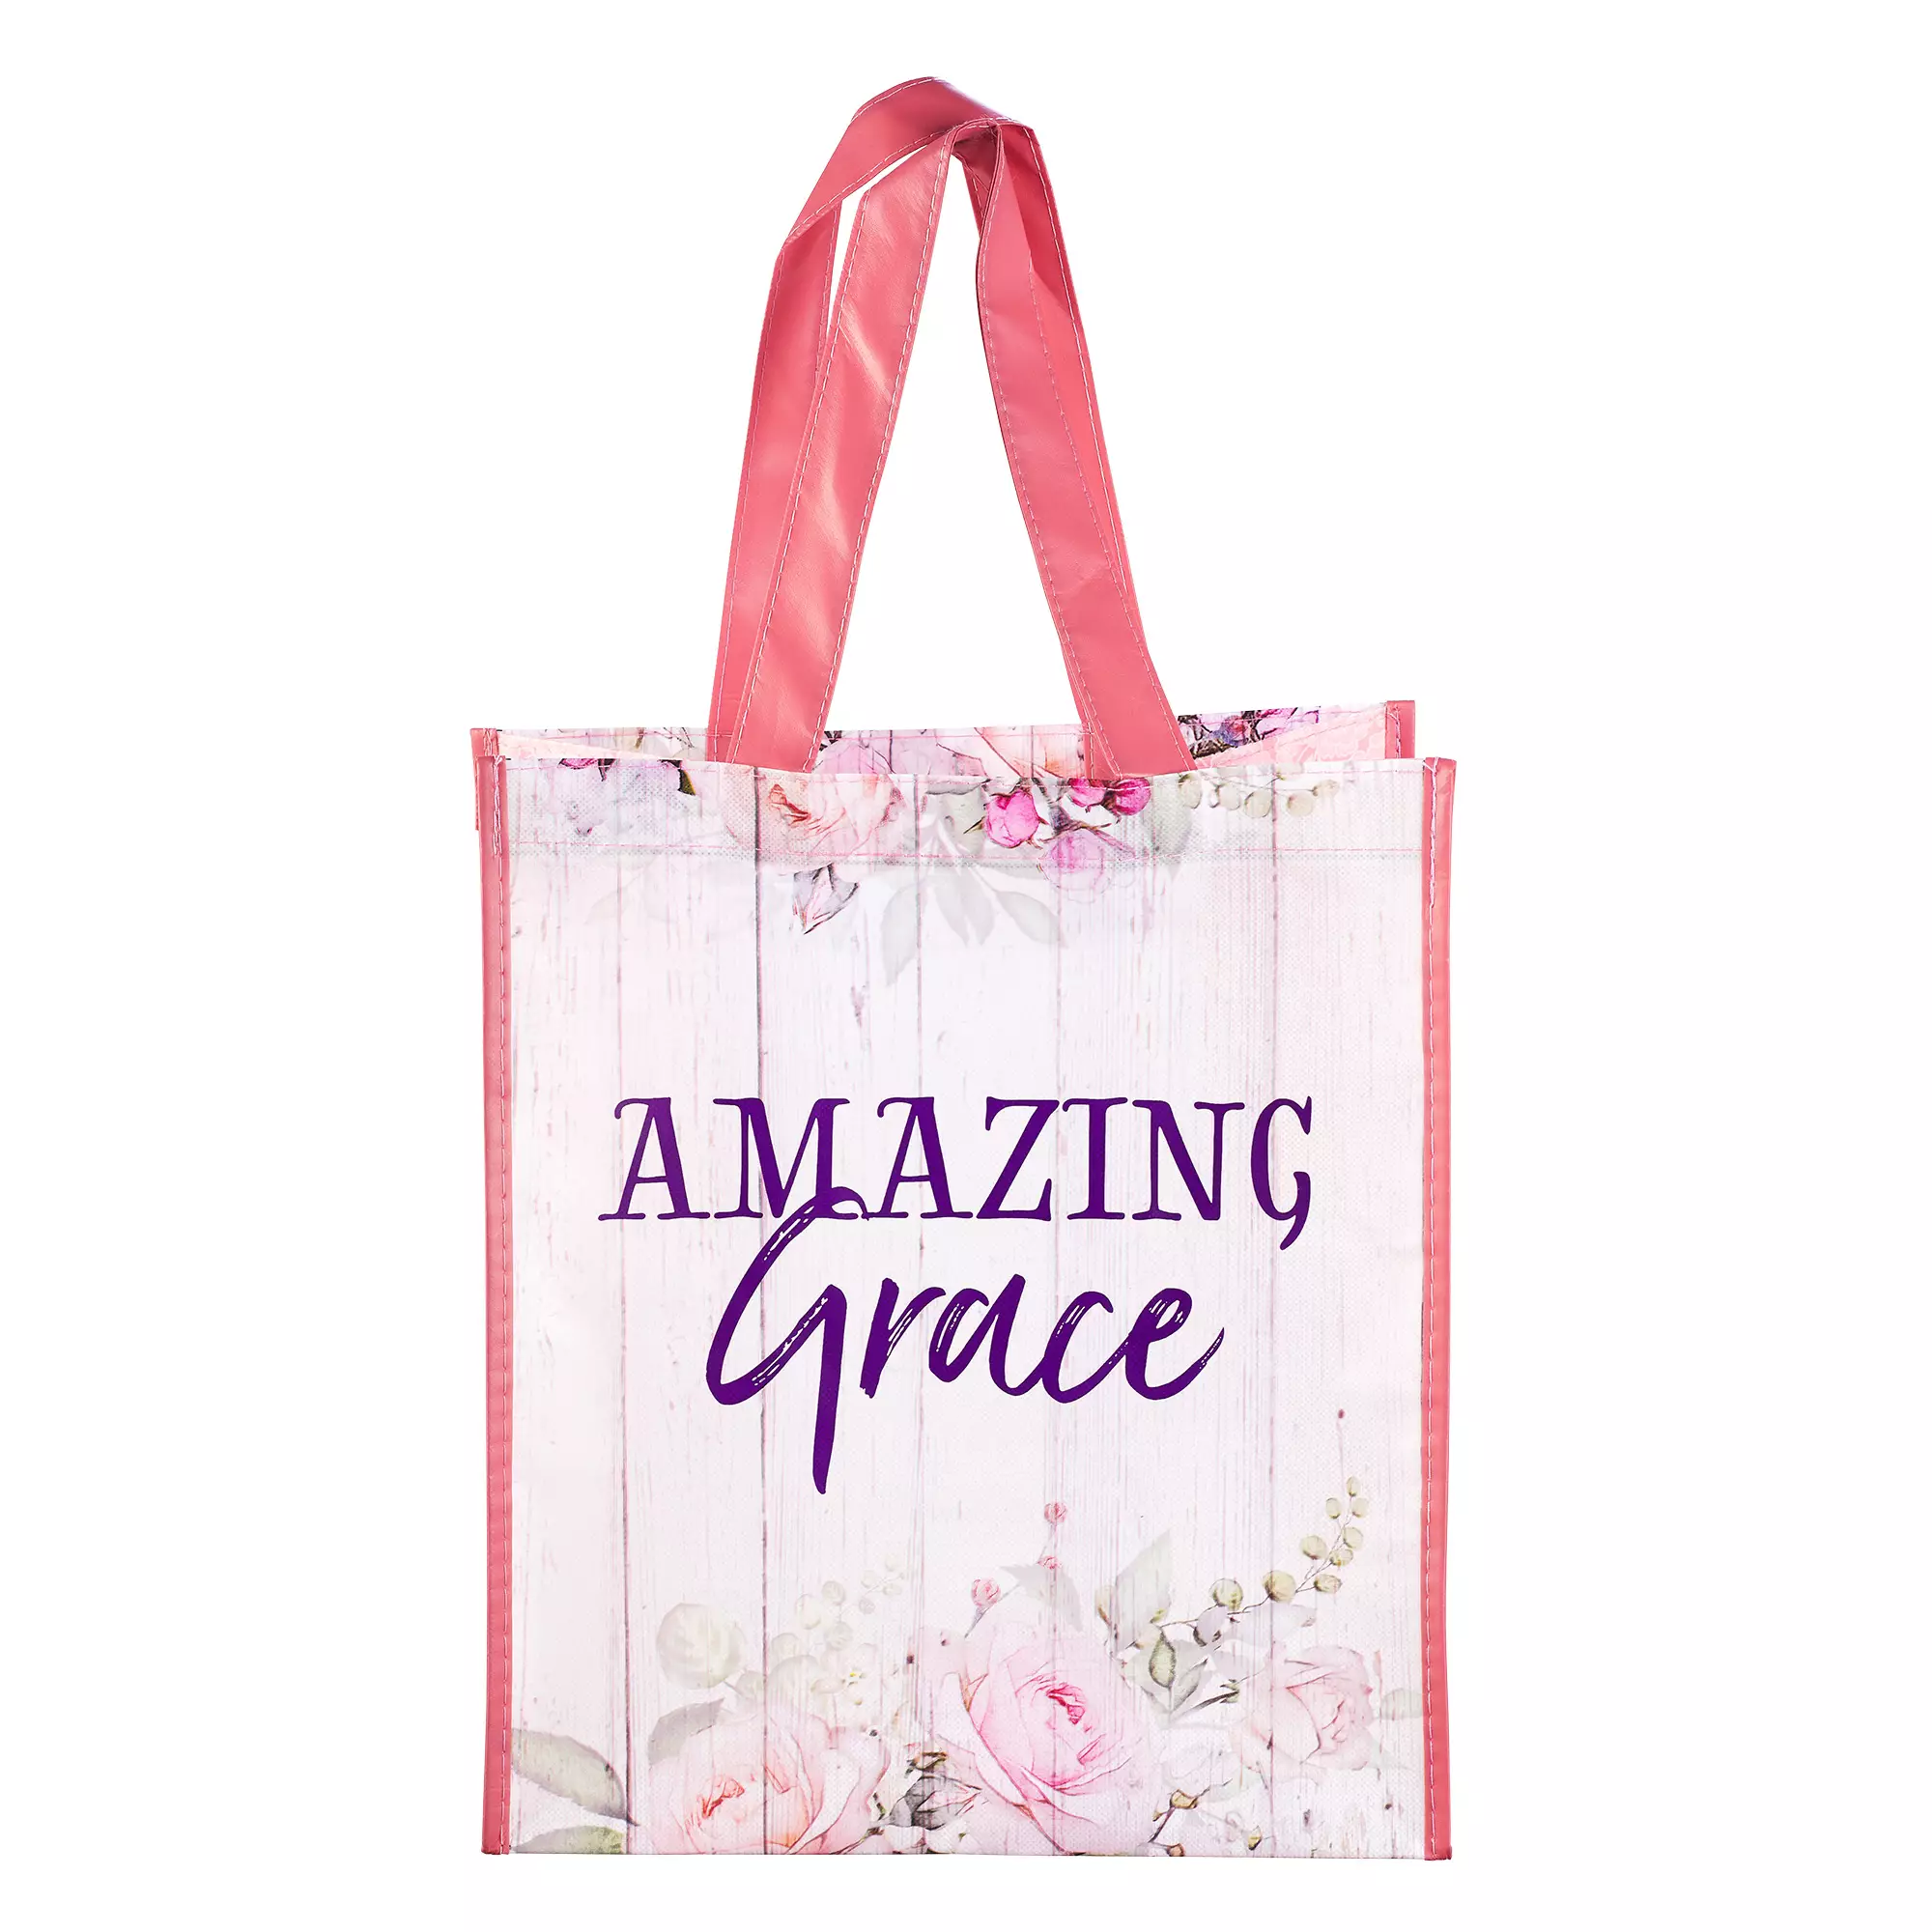 Christian Art Gifts Reusable Shopping Tote for Women: Amazing Grace - Full-color Double Sided Floral Inspirational, Durable, Easy Carry Handbag for Groceries, Books, Supplies, Pastel Pink/White/Purple